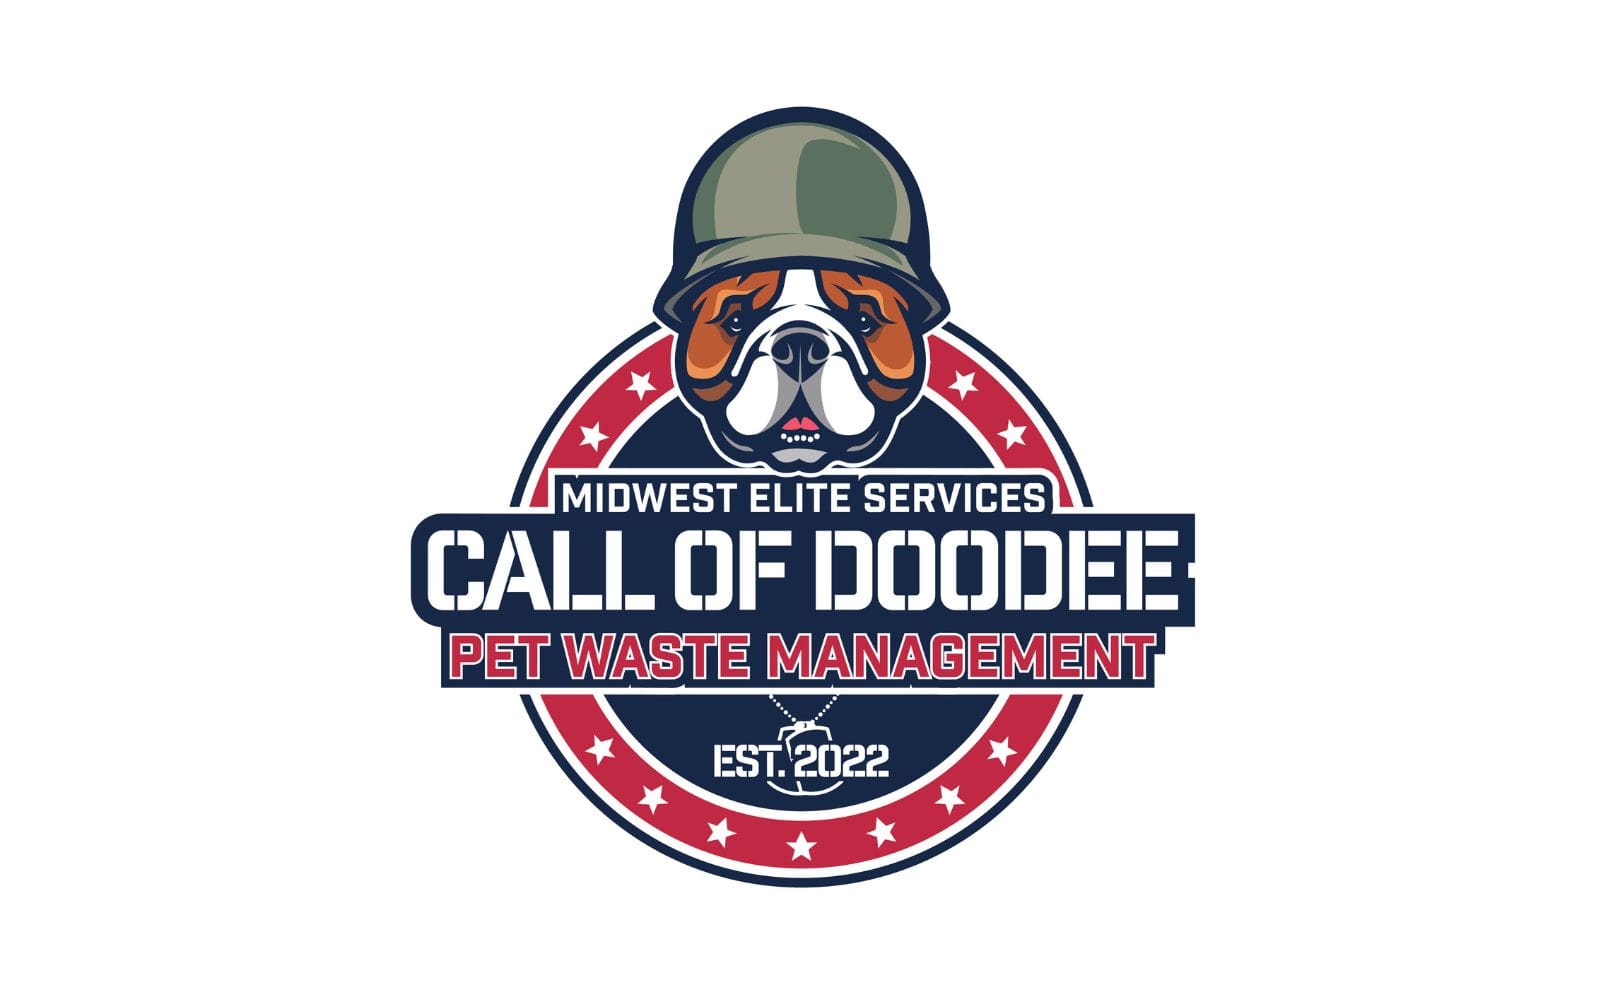 Midwest Elite Services - Call of Doodee